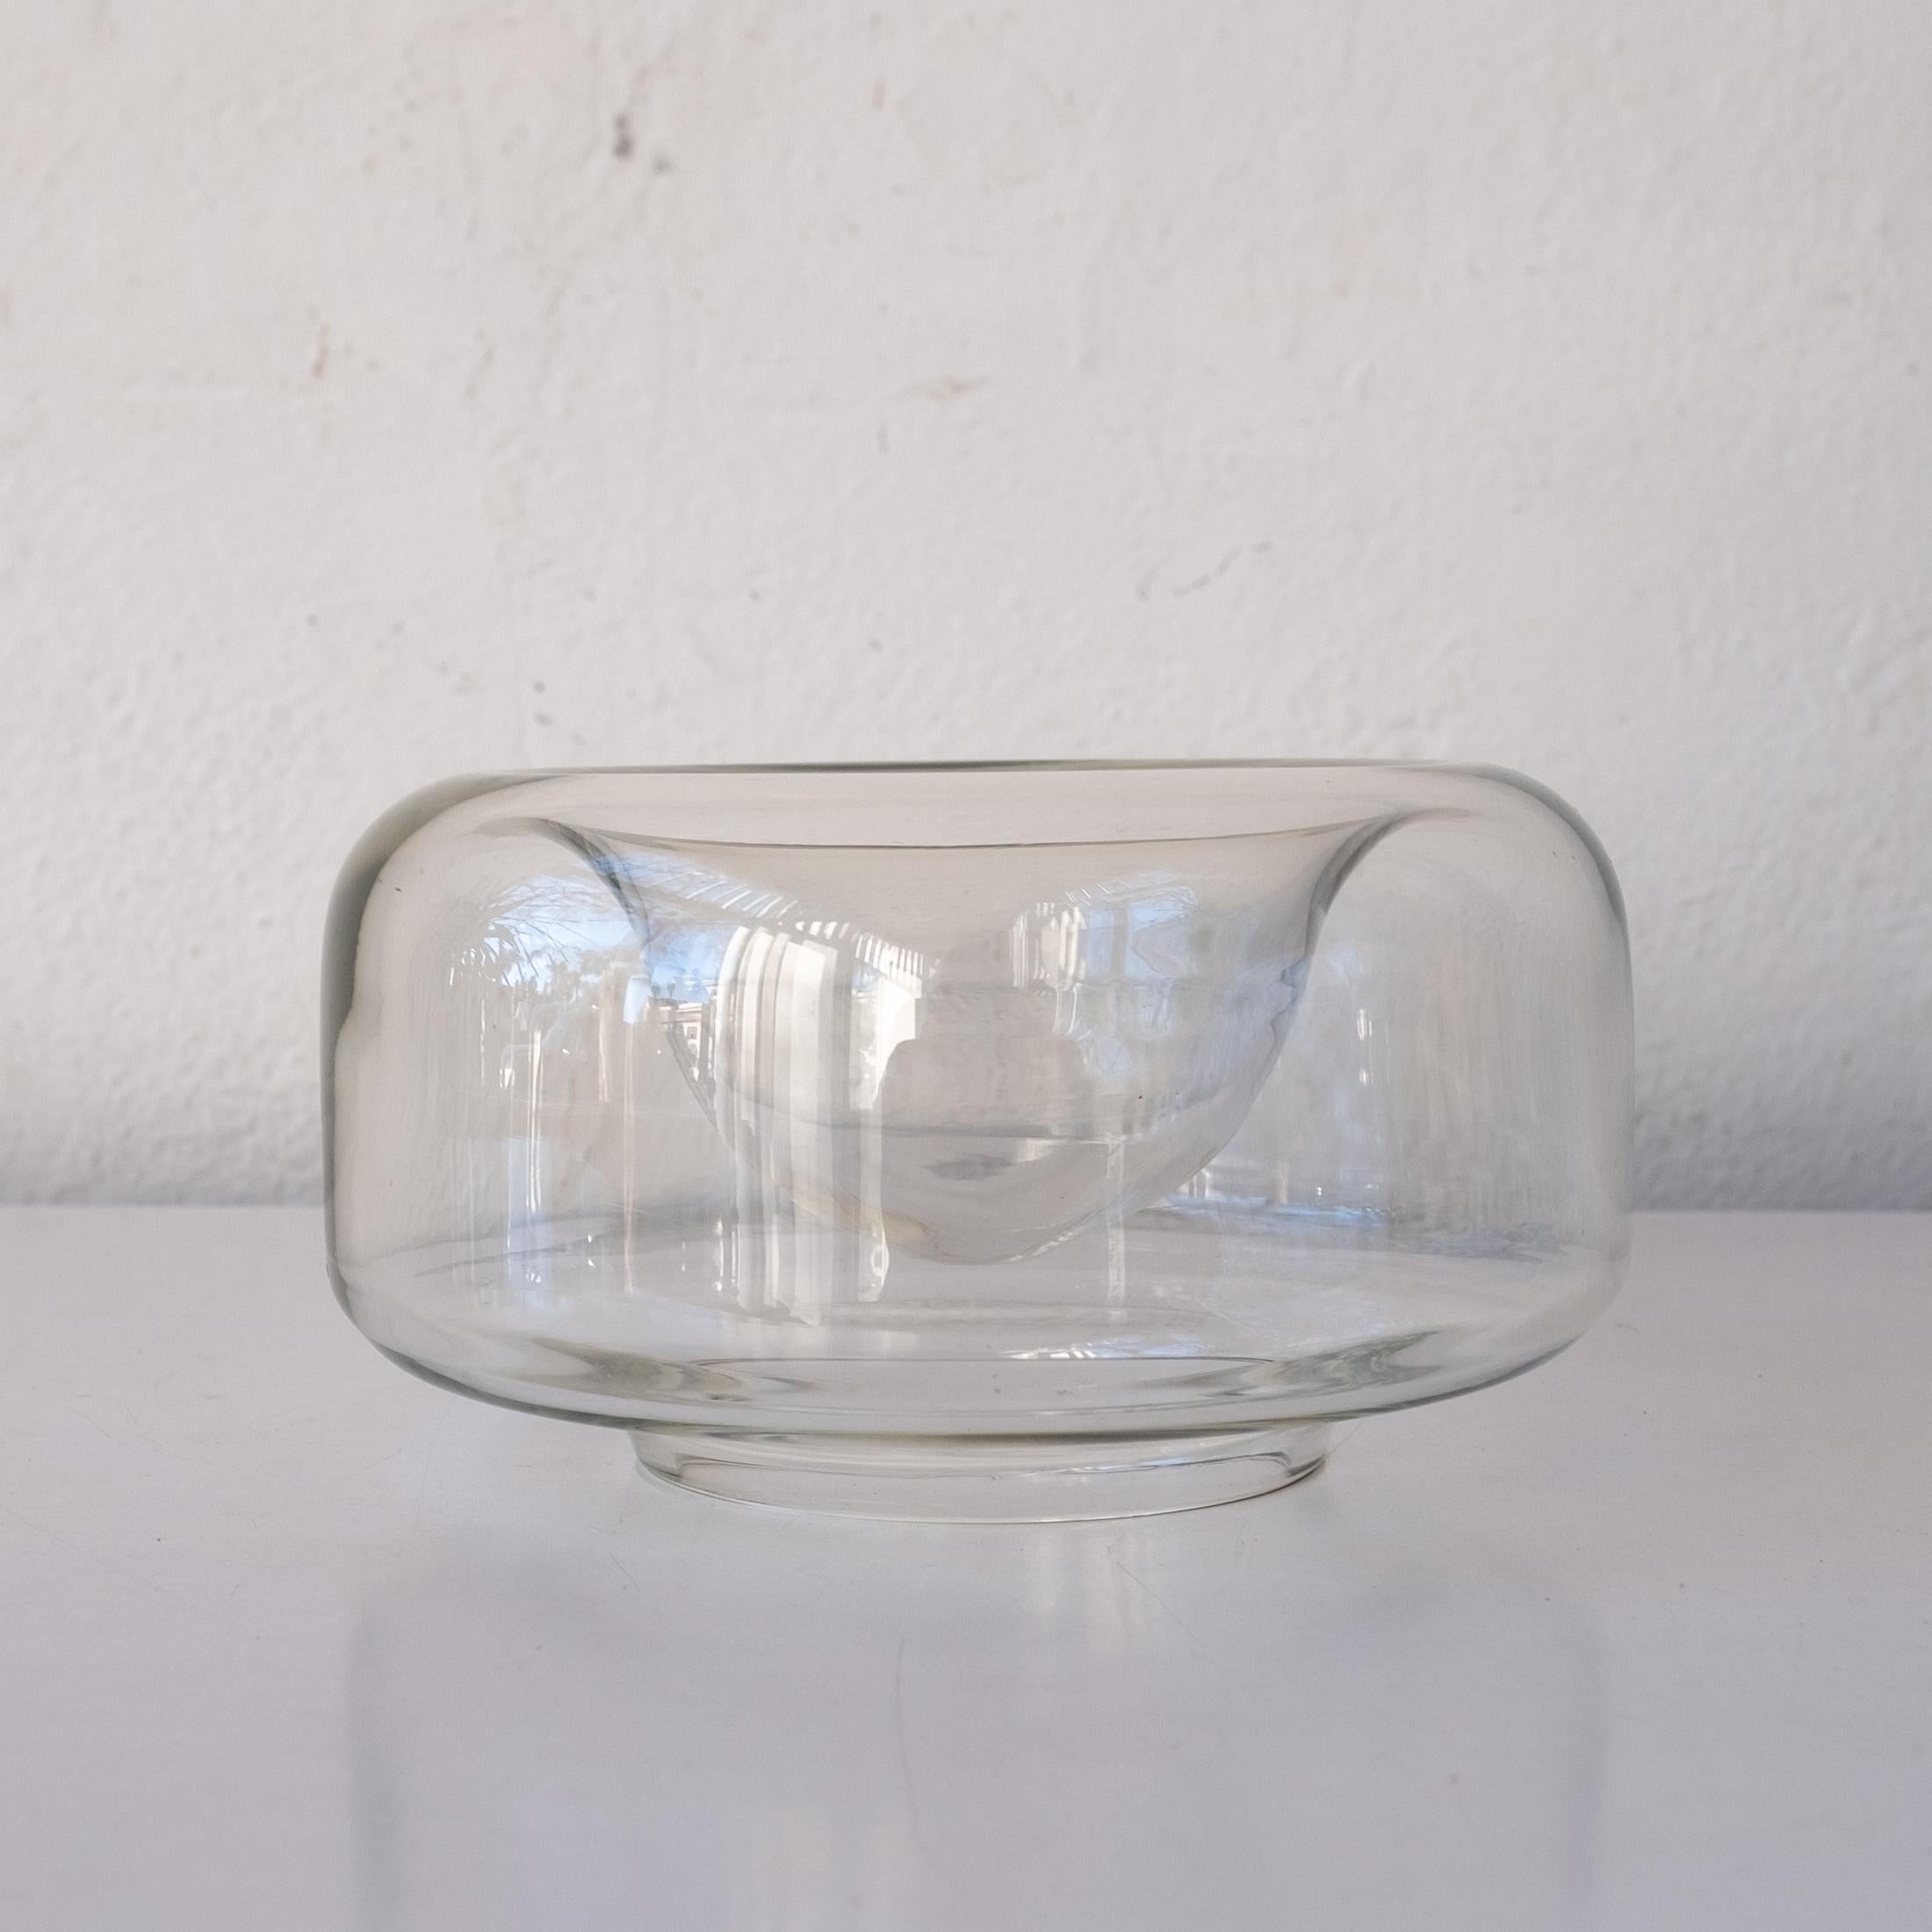 Charles Pfister for Knoll glass bowl. A simple form that is emblematic of his simple and elegant aesthetic. Pfister designed a range of clear glass bowls that were made by Vistosi in Murano, Italy. They are sold by Knoll.

Charles Pfister studied